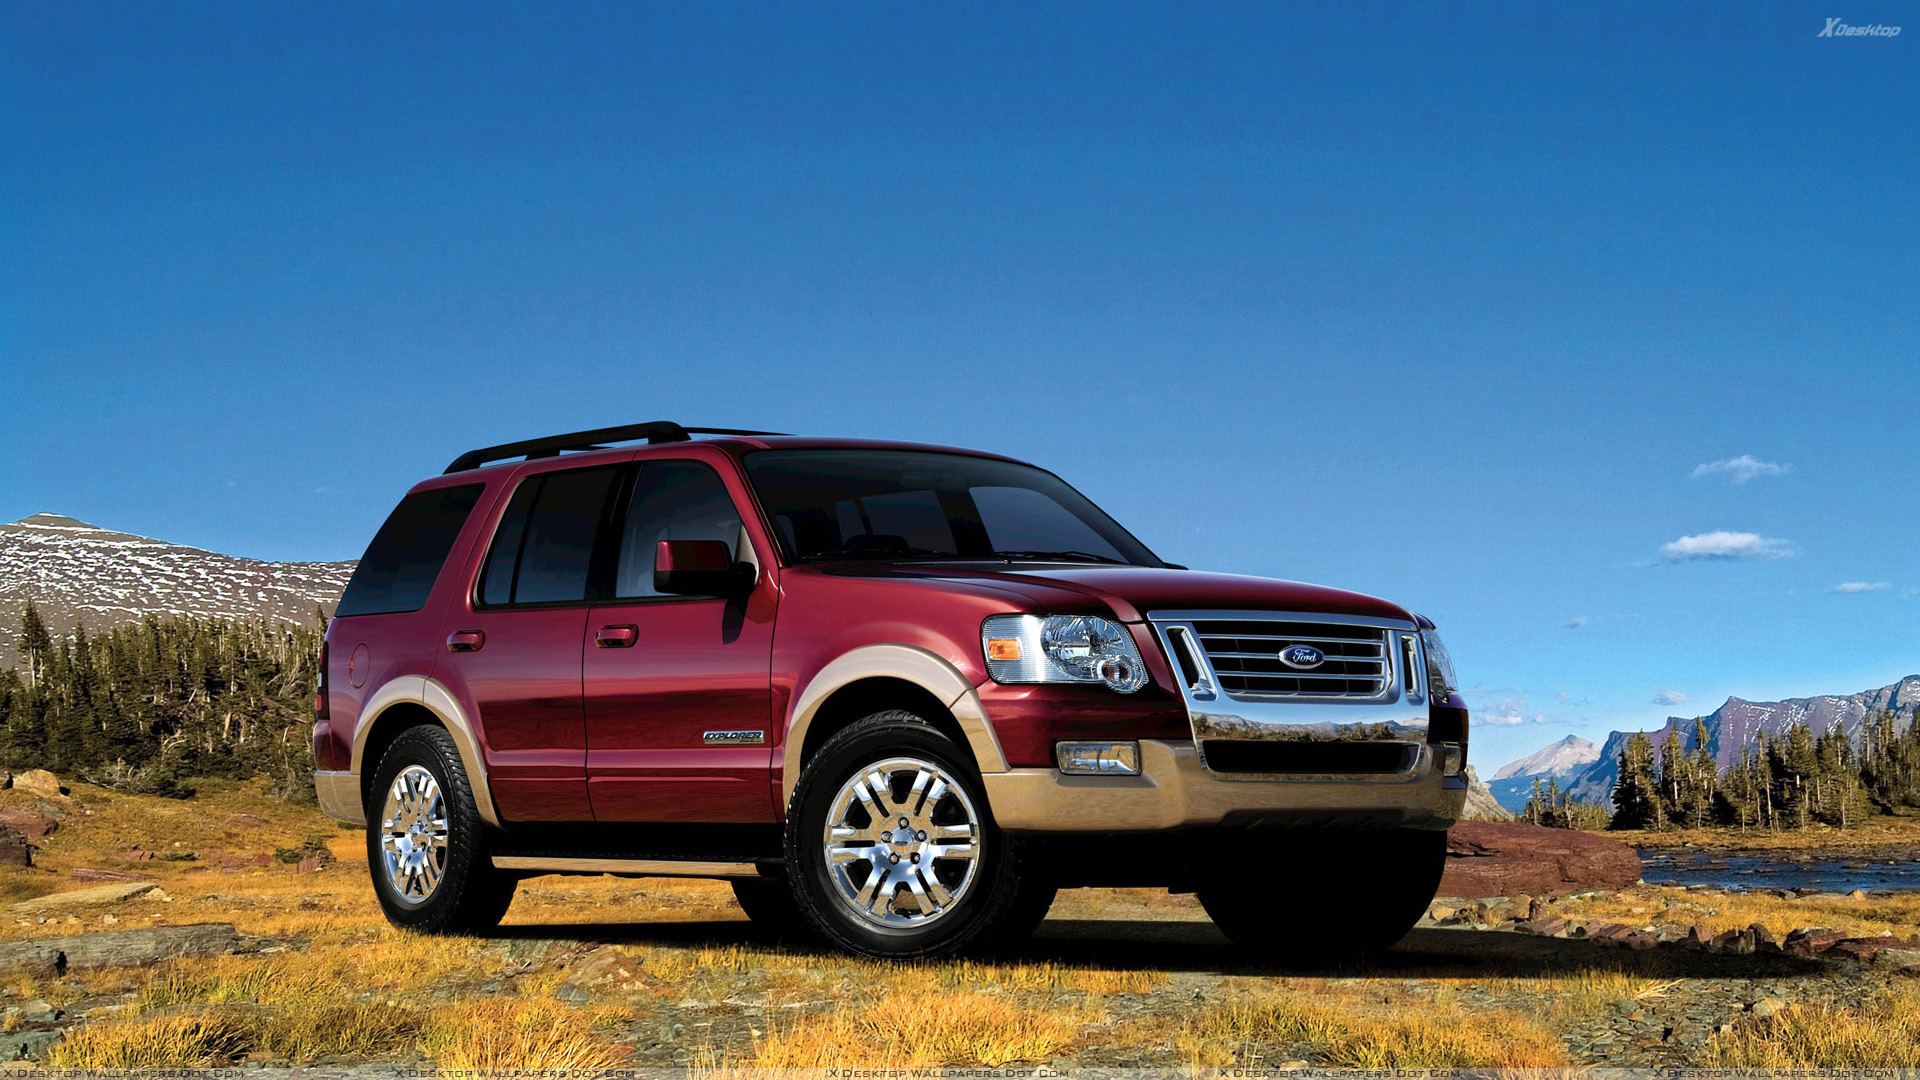 Ford Explorer Wallpaper Photos Image In HD